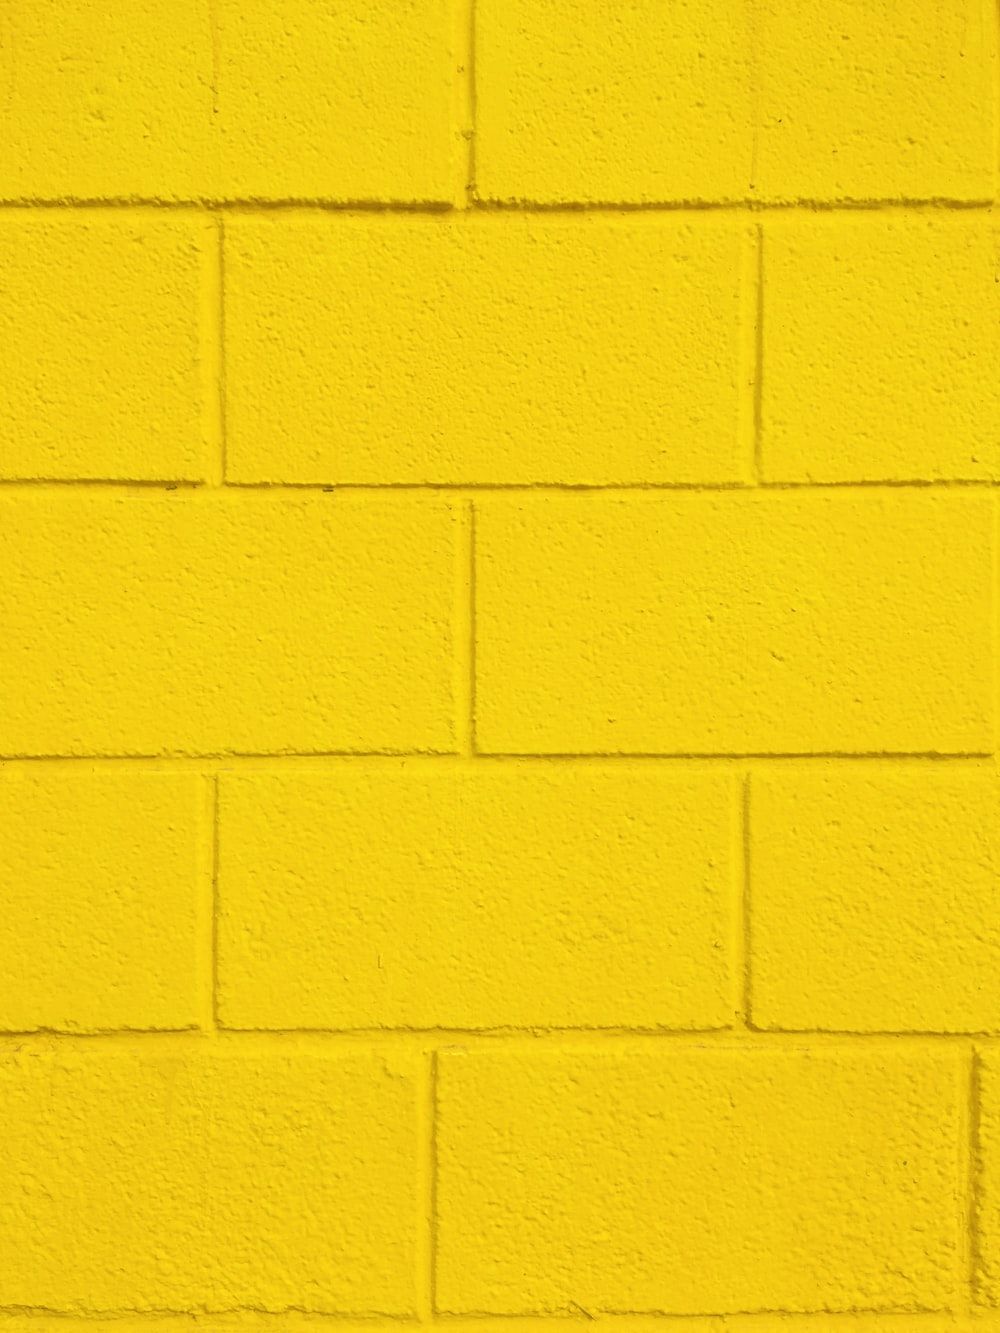 A yellow brick wall with some bricks missing - Light yellow, pastel yellow